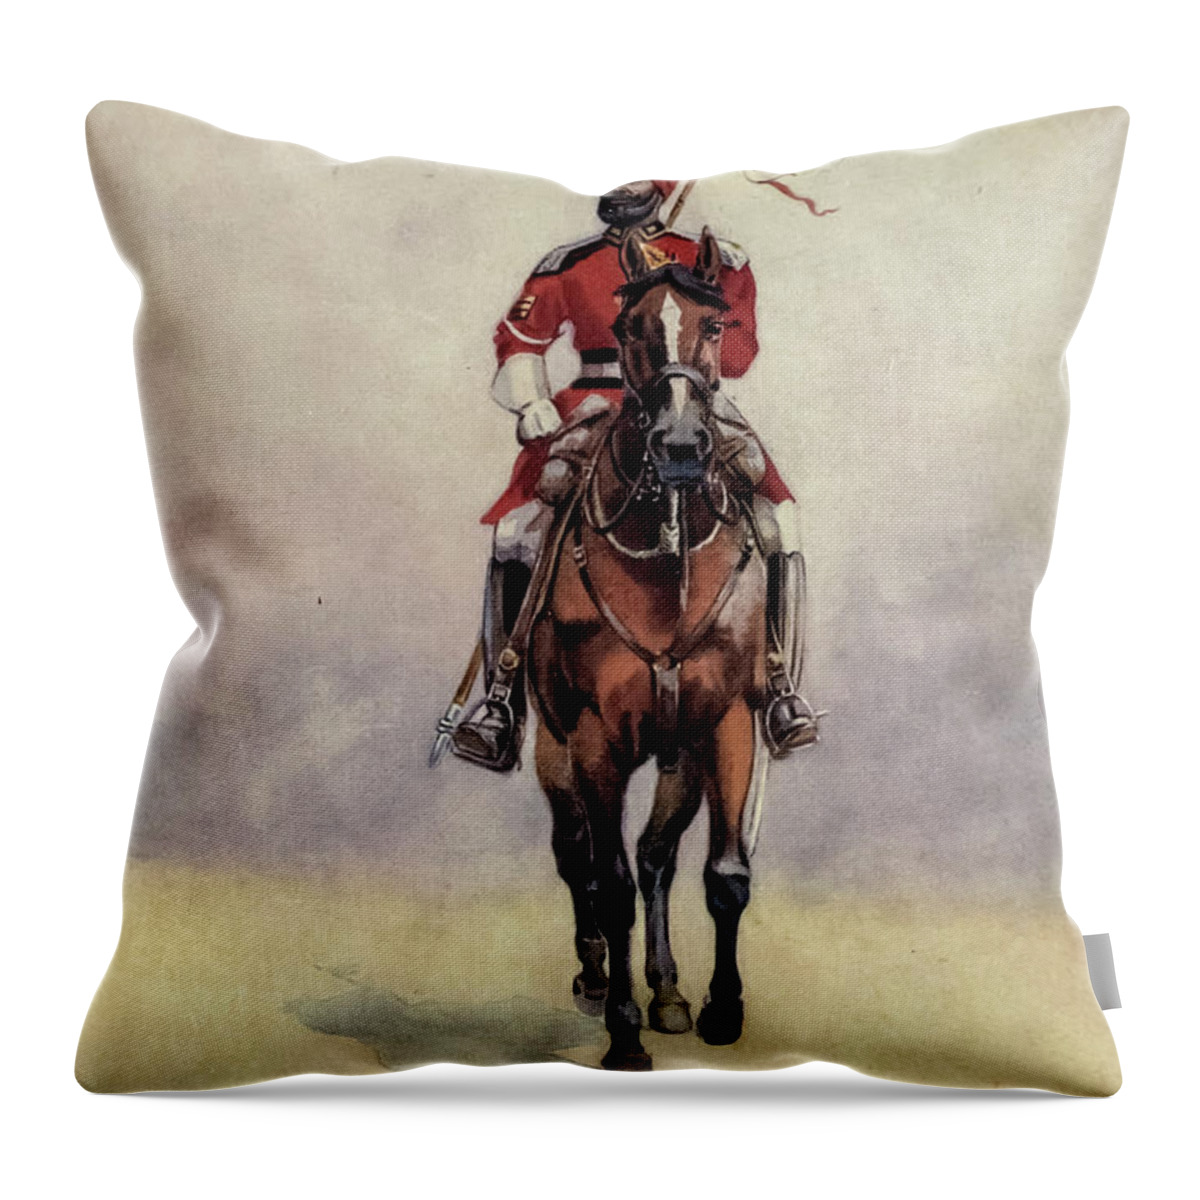 Armies Of India Throw Pillow featuring the painting Governor's Bodyguard, Bombay Musalman Rajput q5 by Historic Illustrations